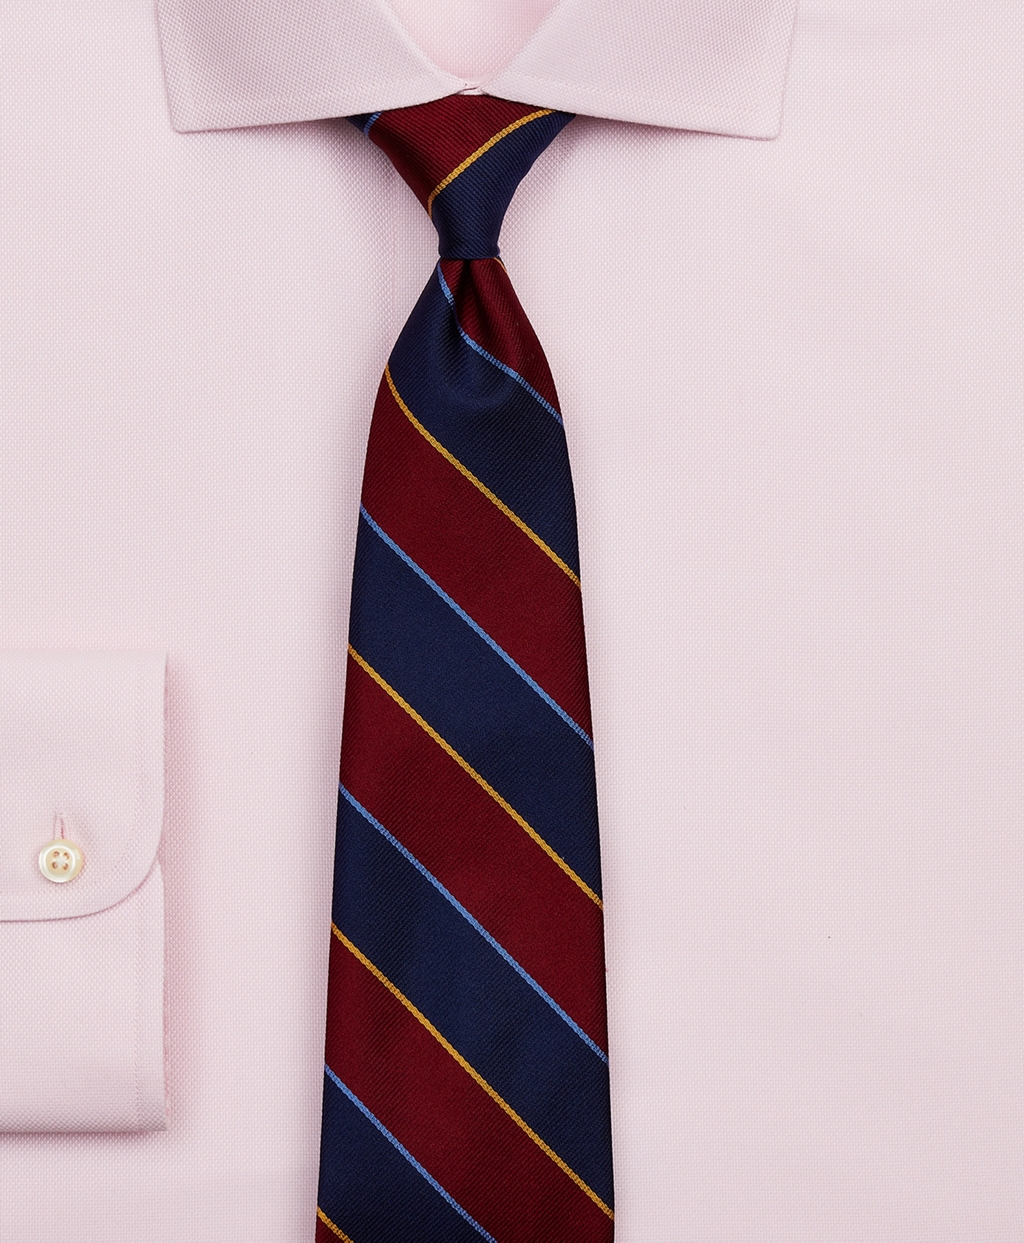 Brooks Brothers Argyll and Sutherland Rep Tie|Stylish Gift For Dad Presents That Are Budget-Friendly|gift for dad